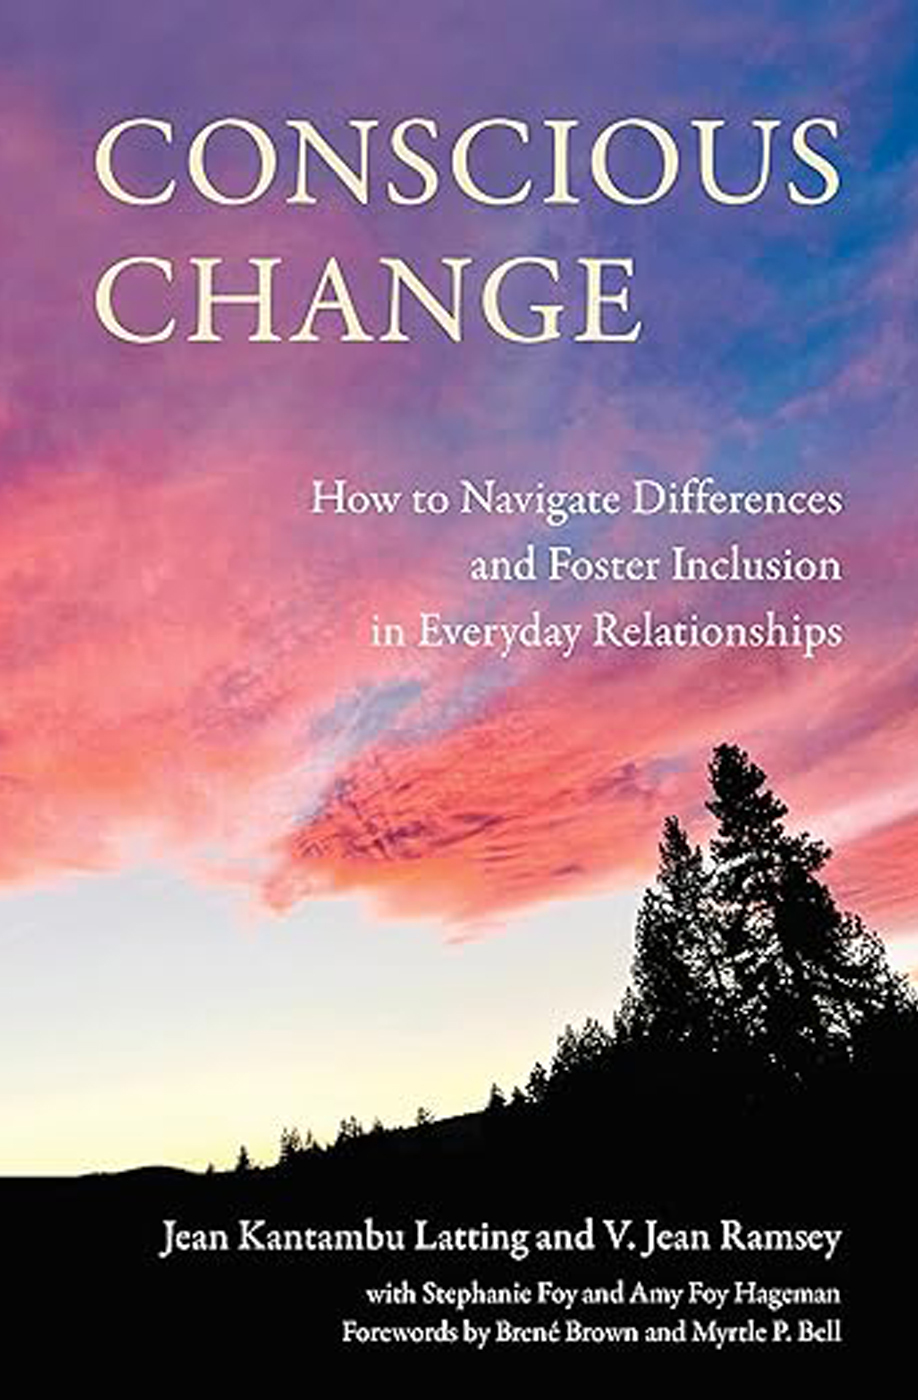 Conscious Change: How to Navigate Differences and Foster Inclusion in Everyday Relationships by Jean Kantambu Latting book cover